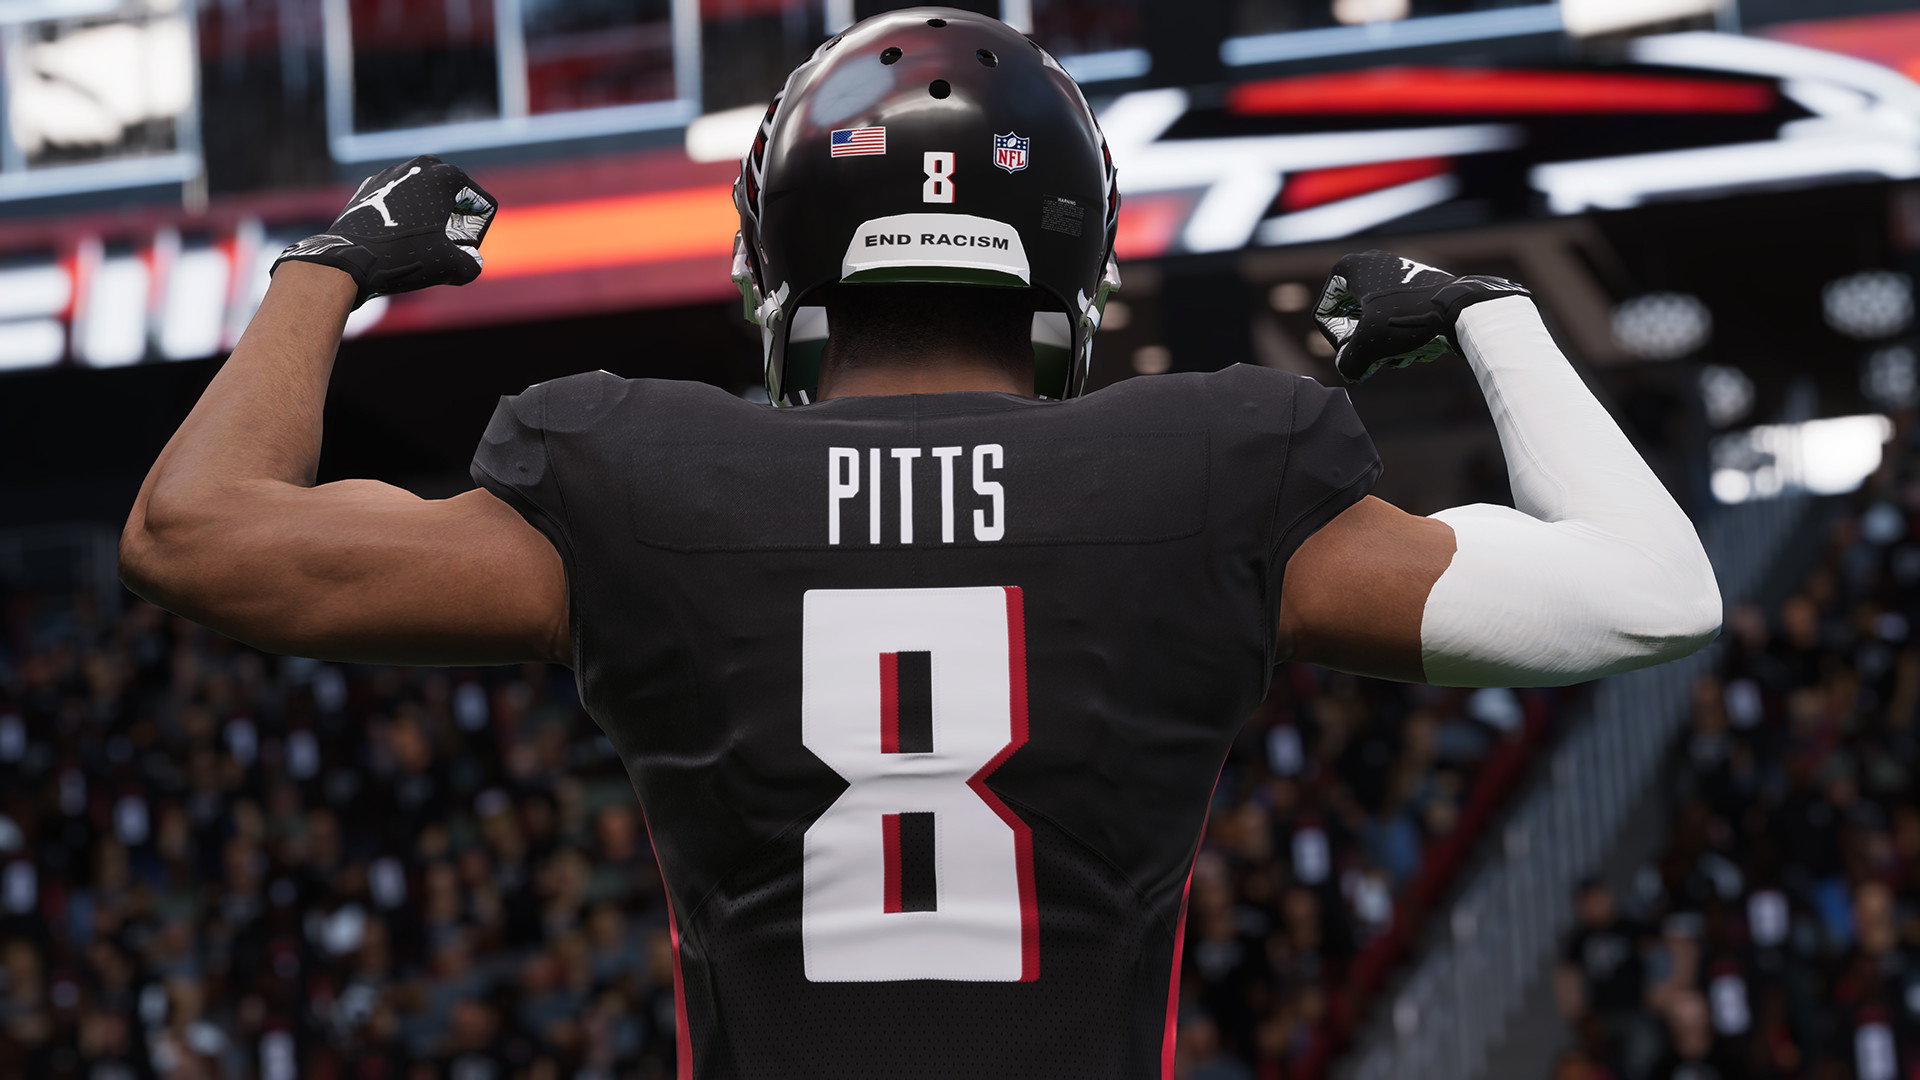 madden nfl 22 review